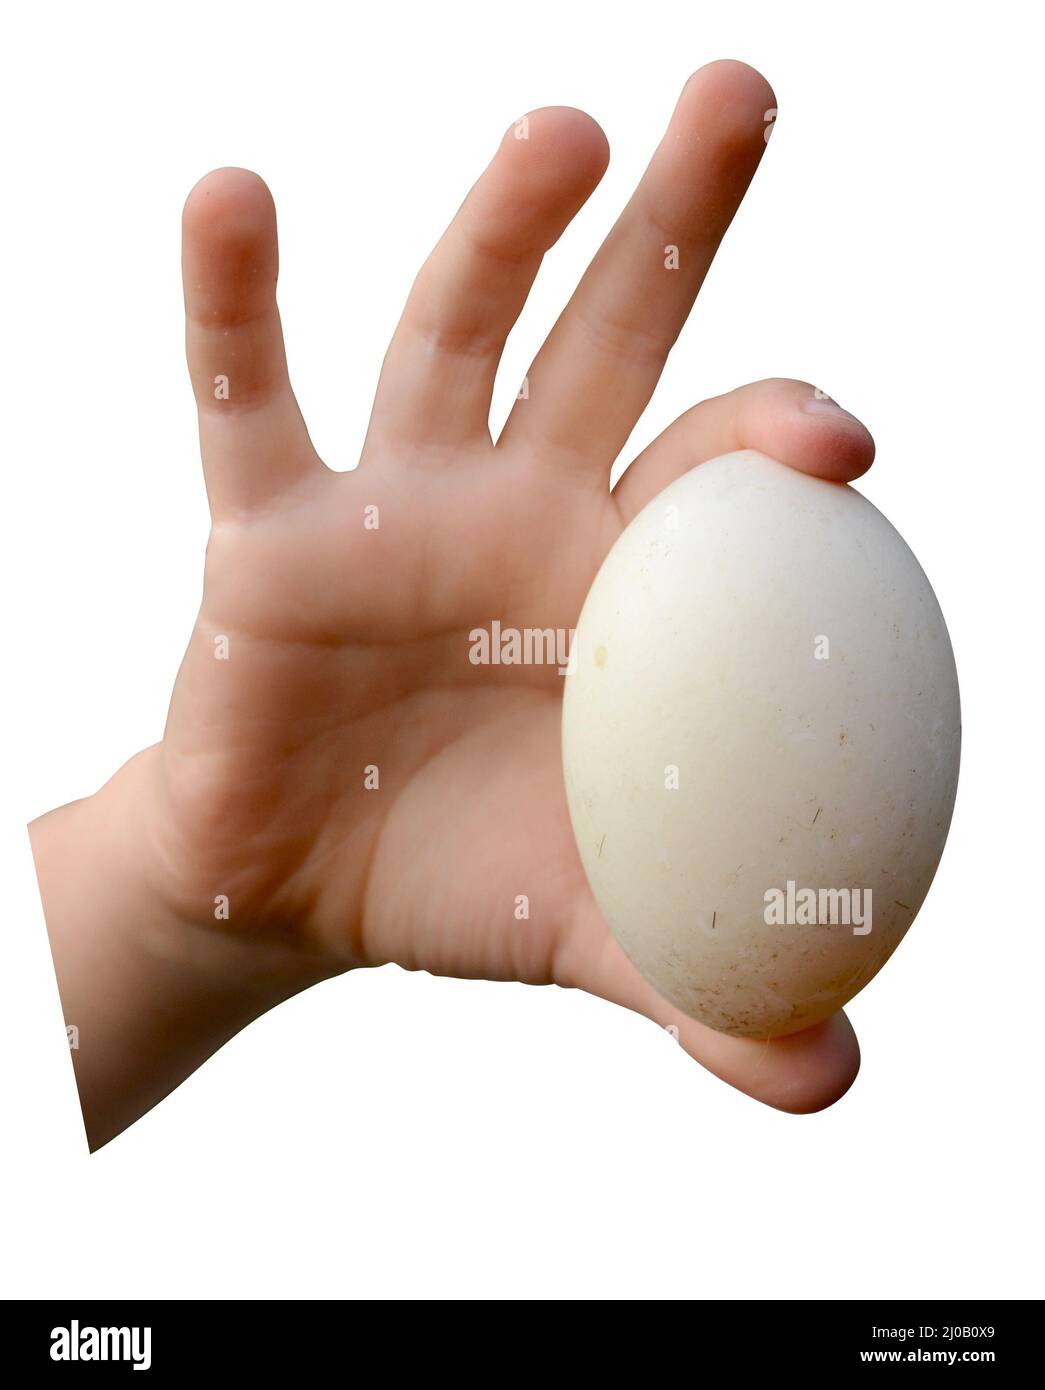 Isolation Of A Child's Hand Holding A Dirty Farm Egg Stock Photo